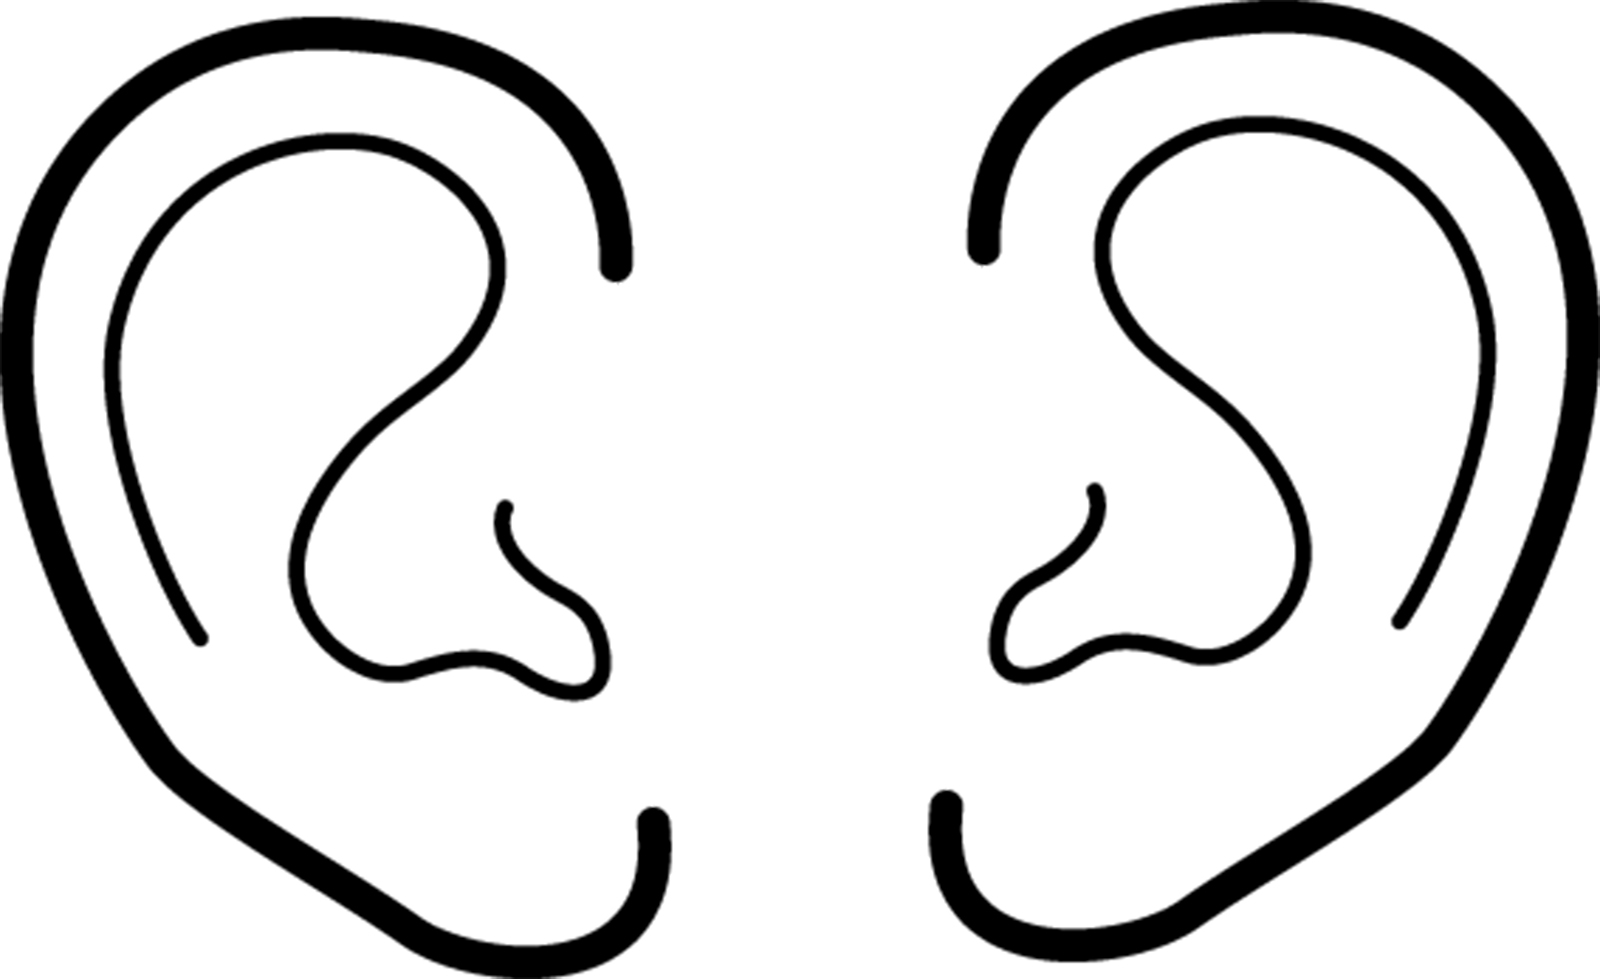 Ears clip art clipart free to